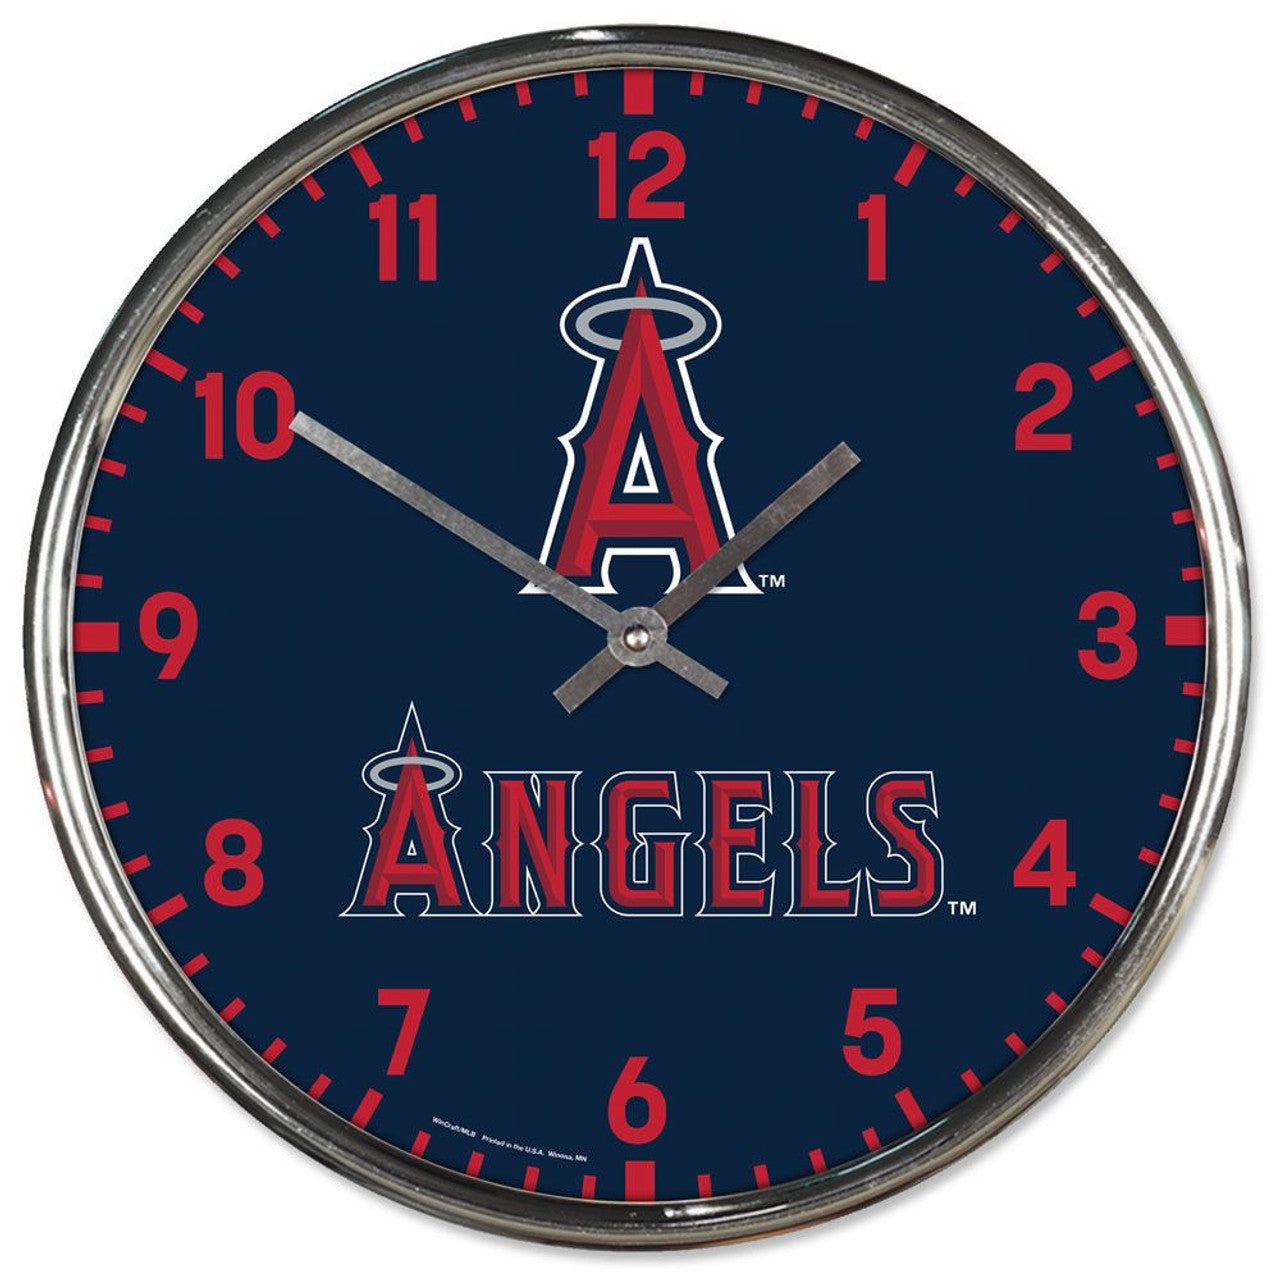 Los Angeles Angels 12" Round Chrome Wall Clock by Wincraft